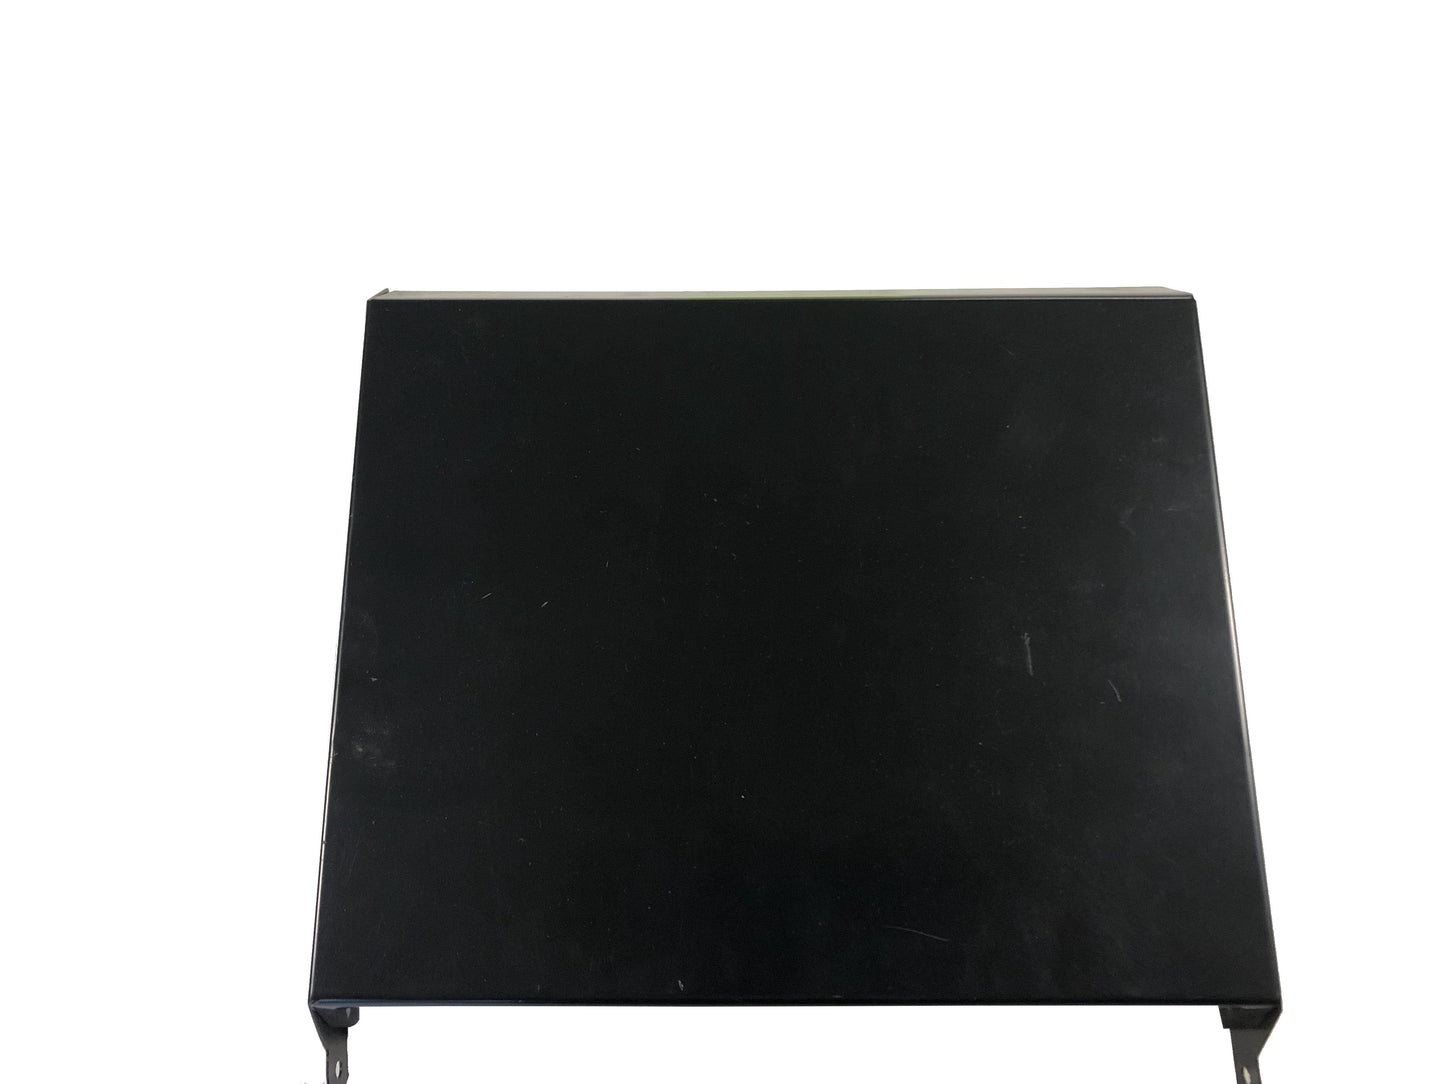 Broil King 10393T401 side burner cover. Order your parts through Barbecues Galore and be ready to impress at your next family BBQ. 3 Locations in the GTA: Burlington, Oakville & Etobicoke, Ontario. 2 in Calgary, Alberta.